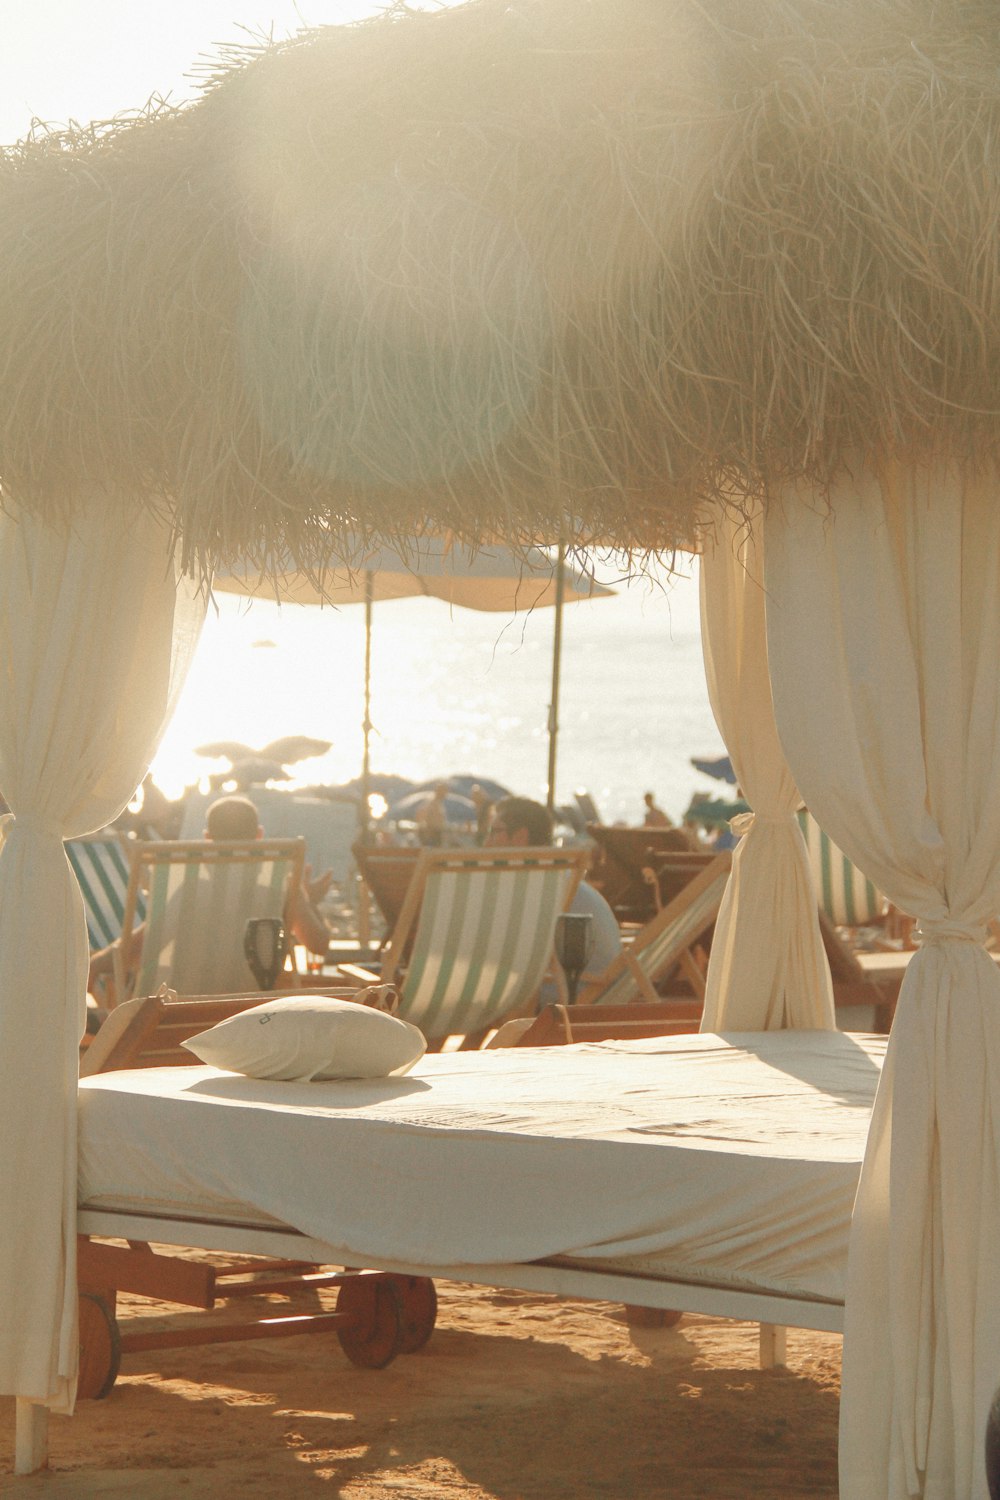 a bed sitting under a thatched umbrella on a beach